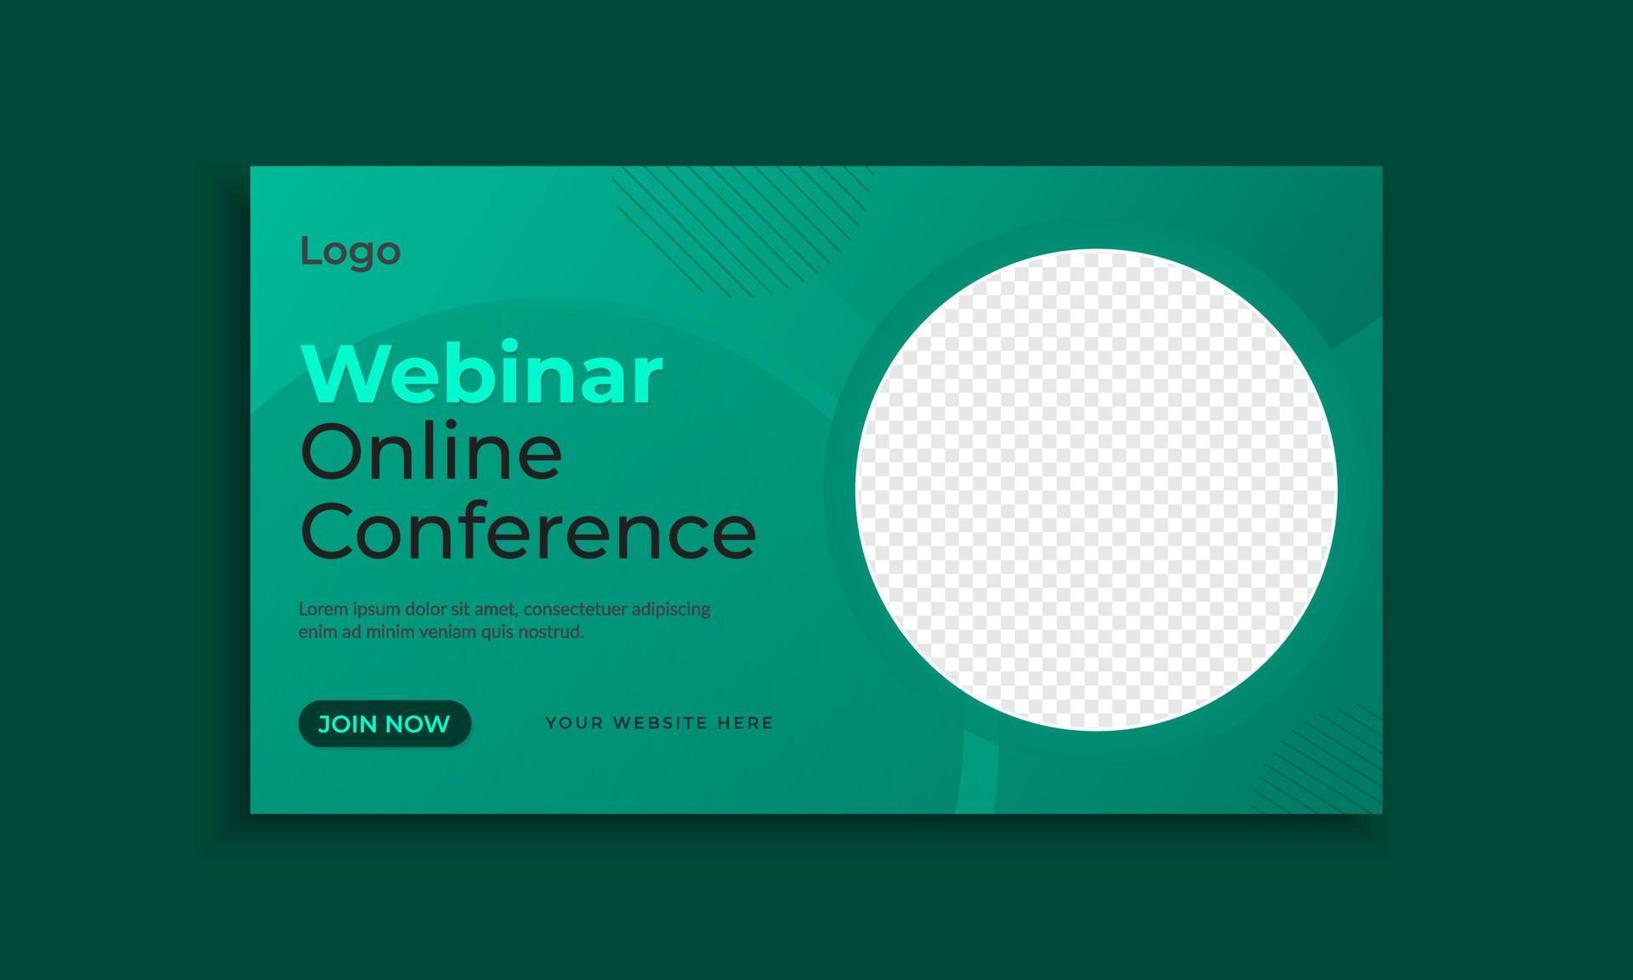 Online business webinar conference web banner template layout vector